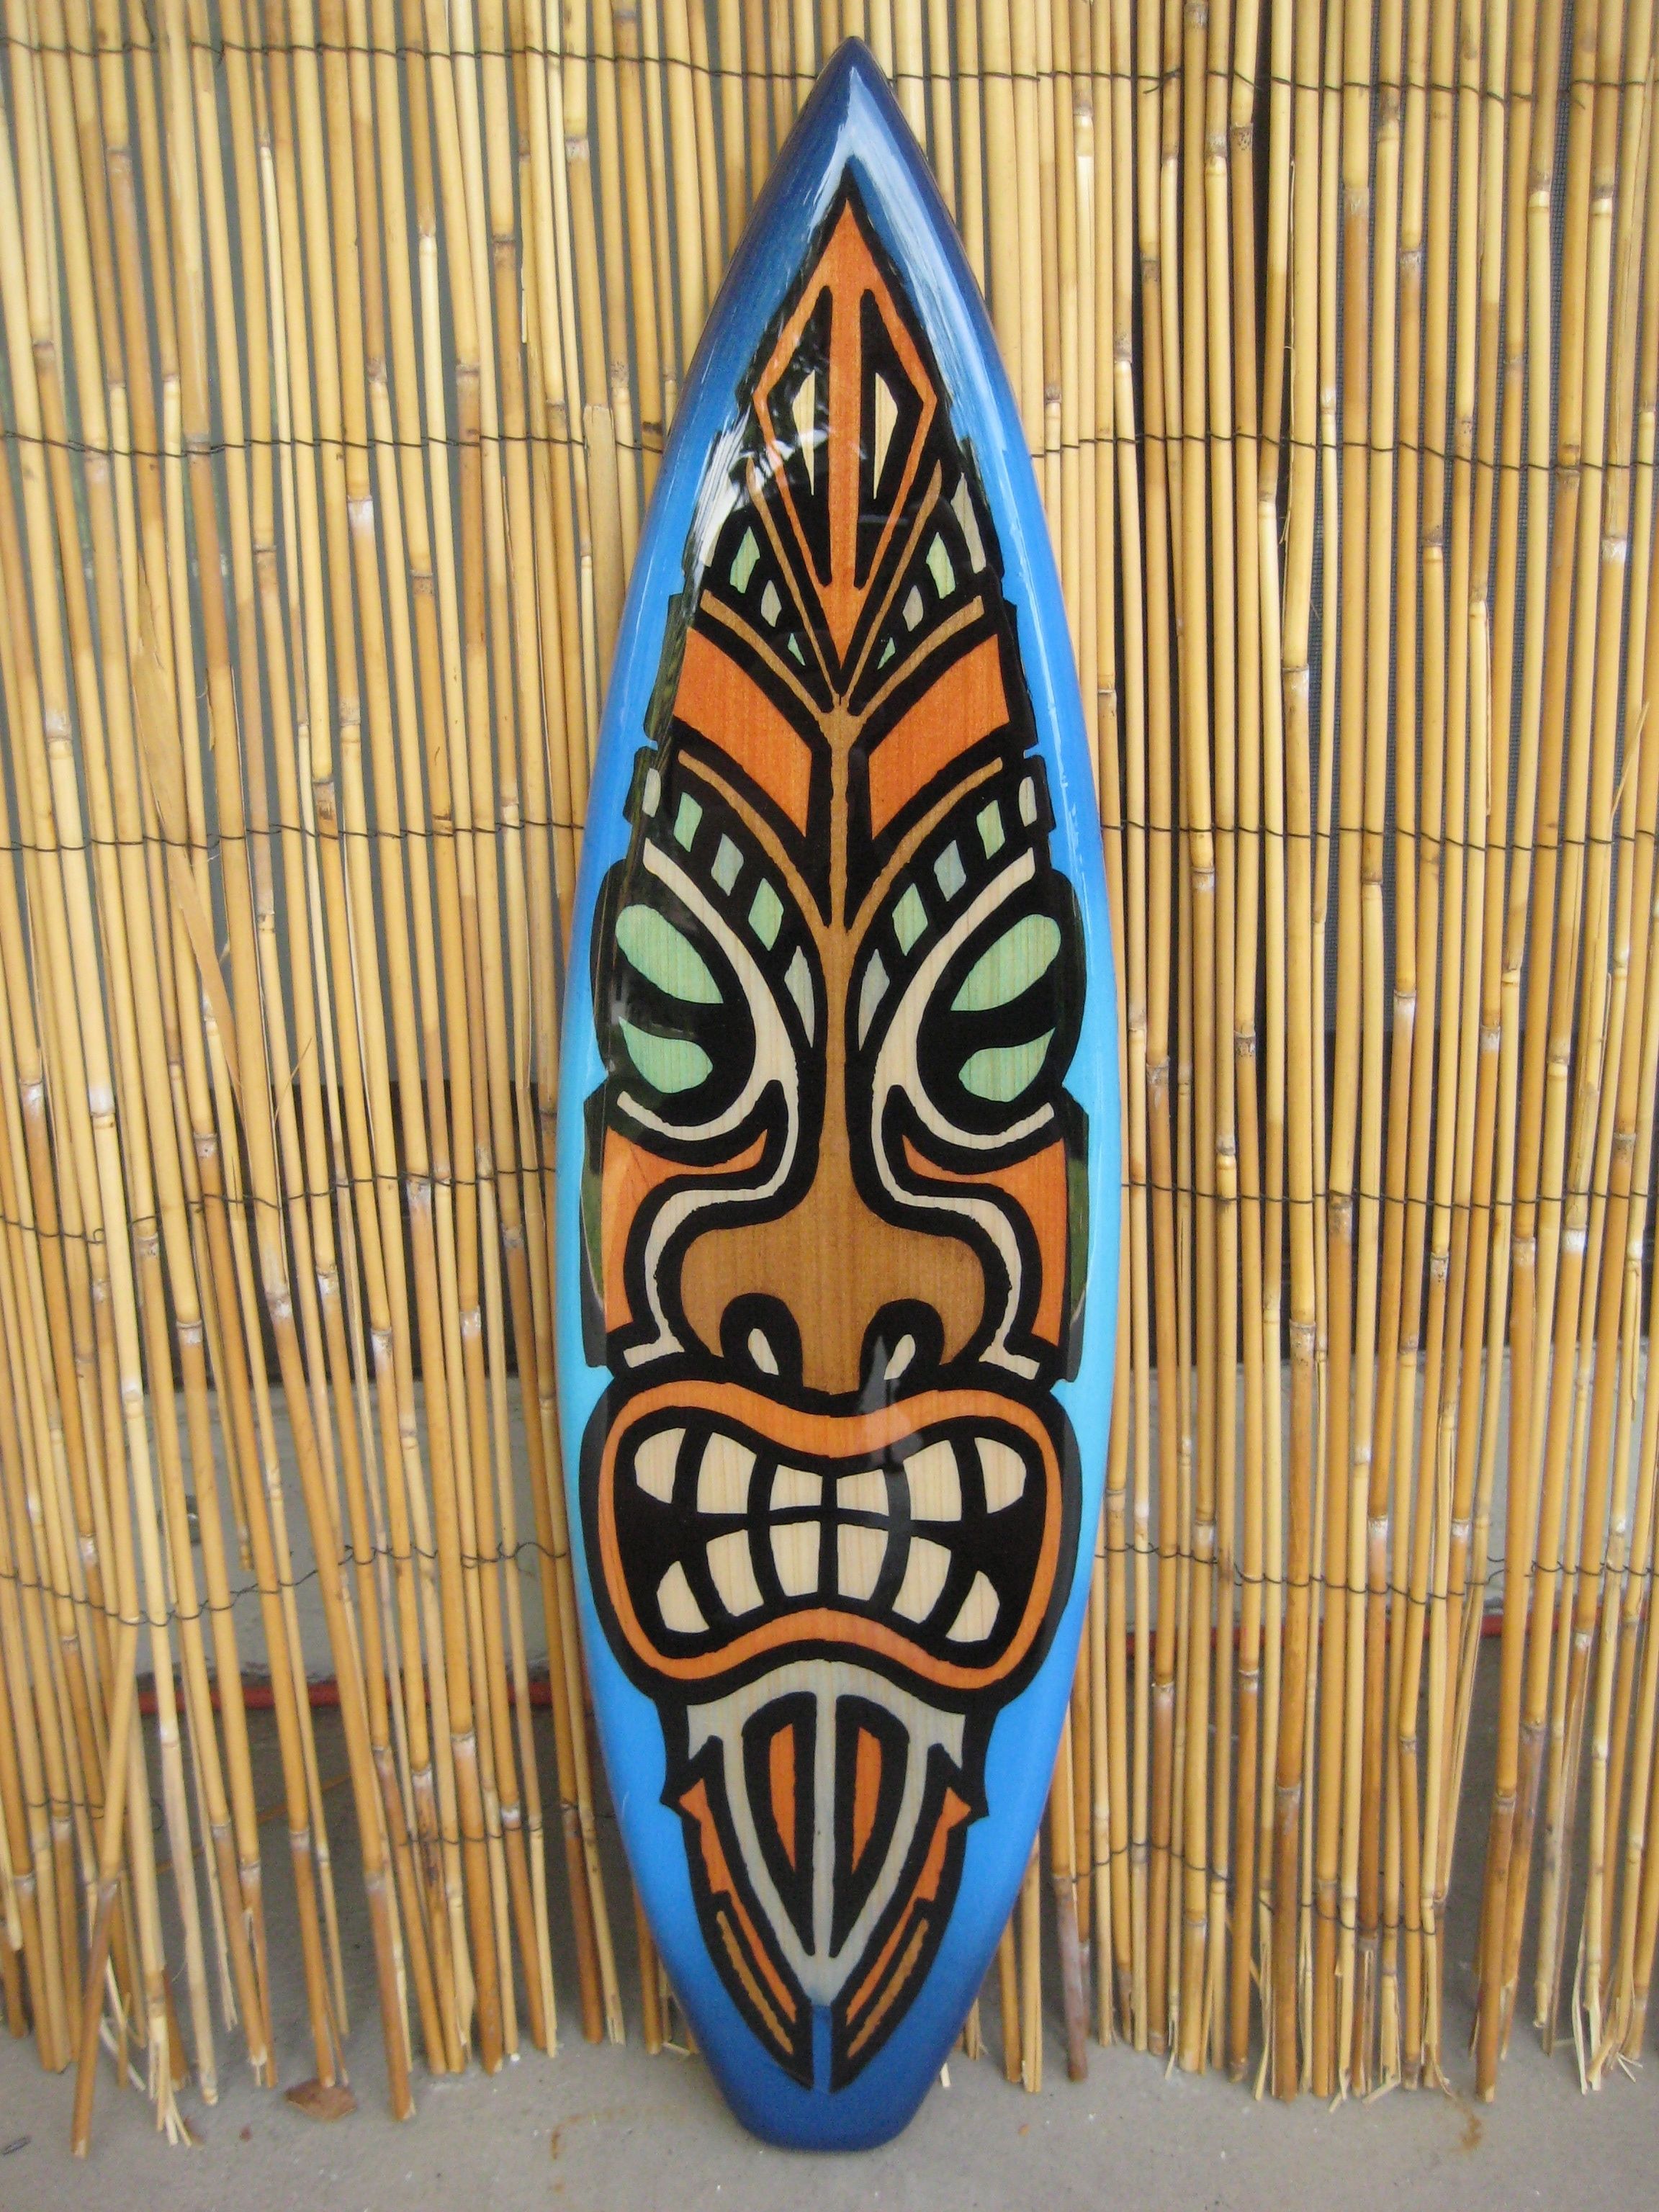 Most Popular Decorative Surfboard Wall Art Within The Warrior. From Our New "tiki Deck" Design (View 7 of 15)